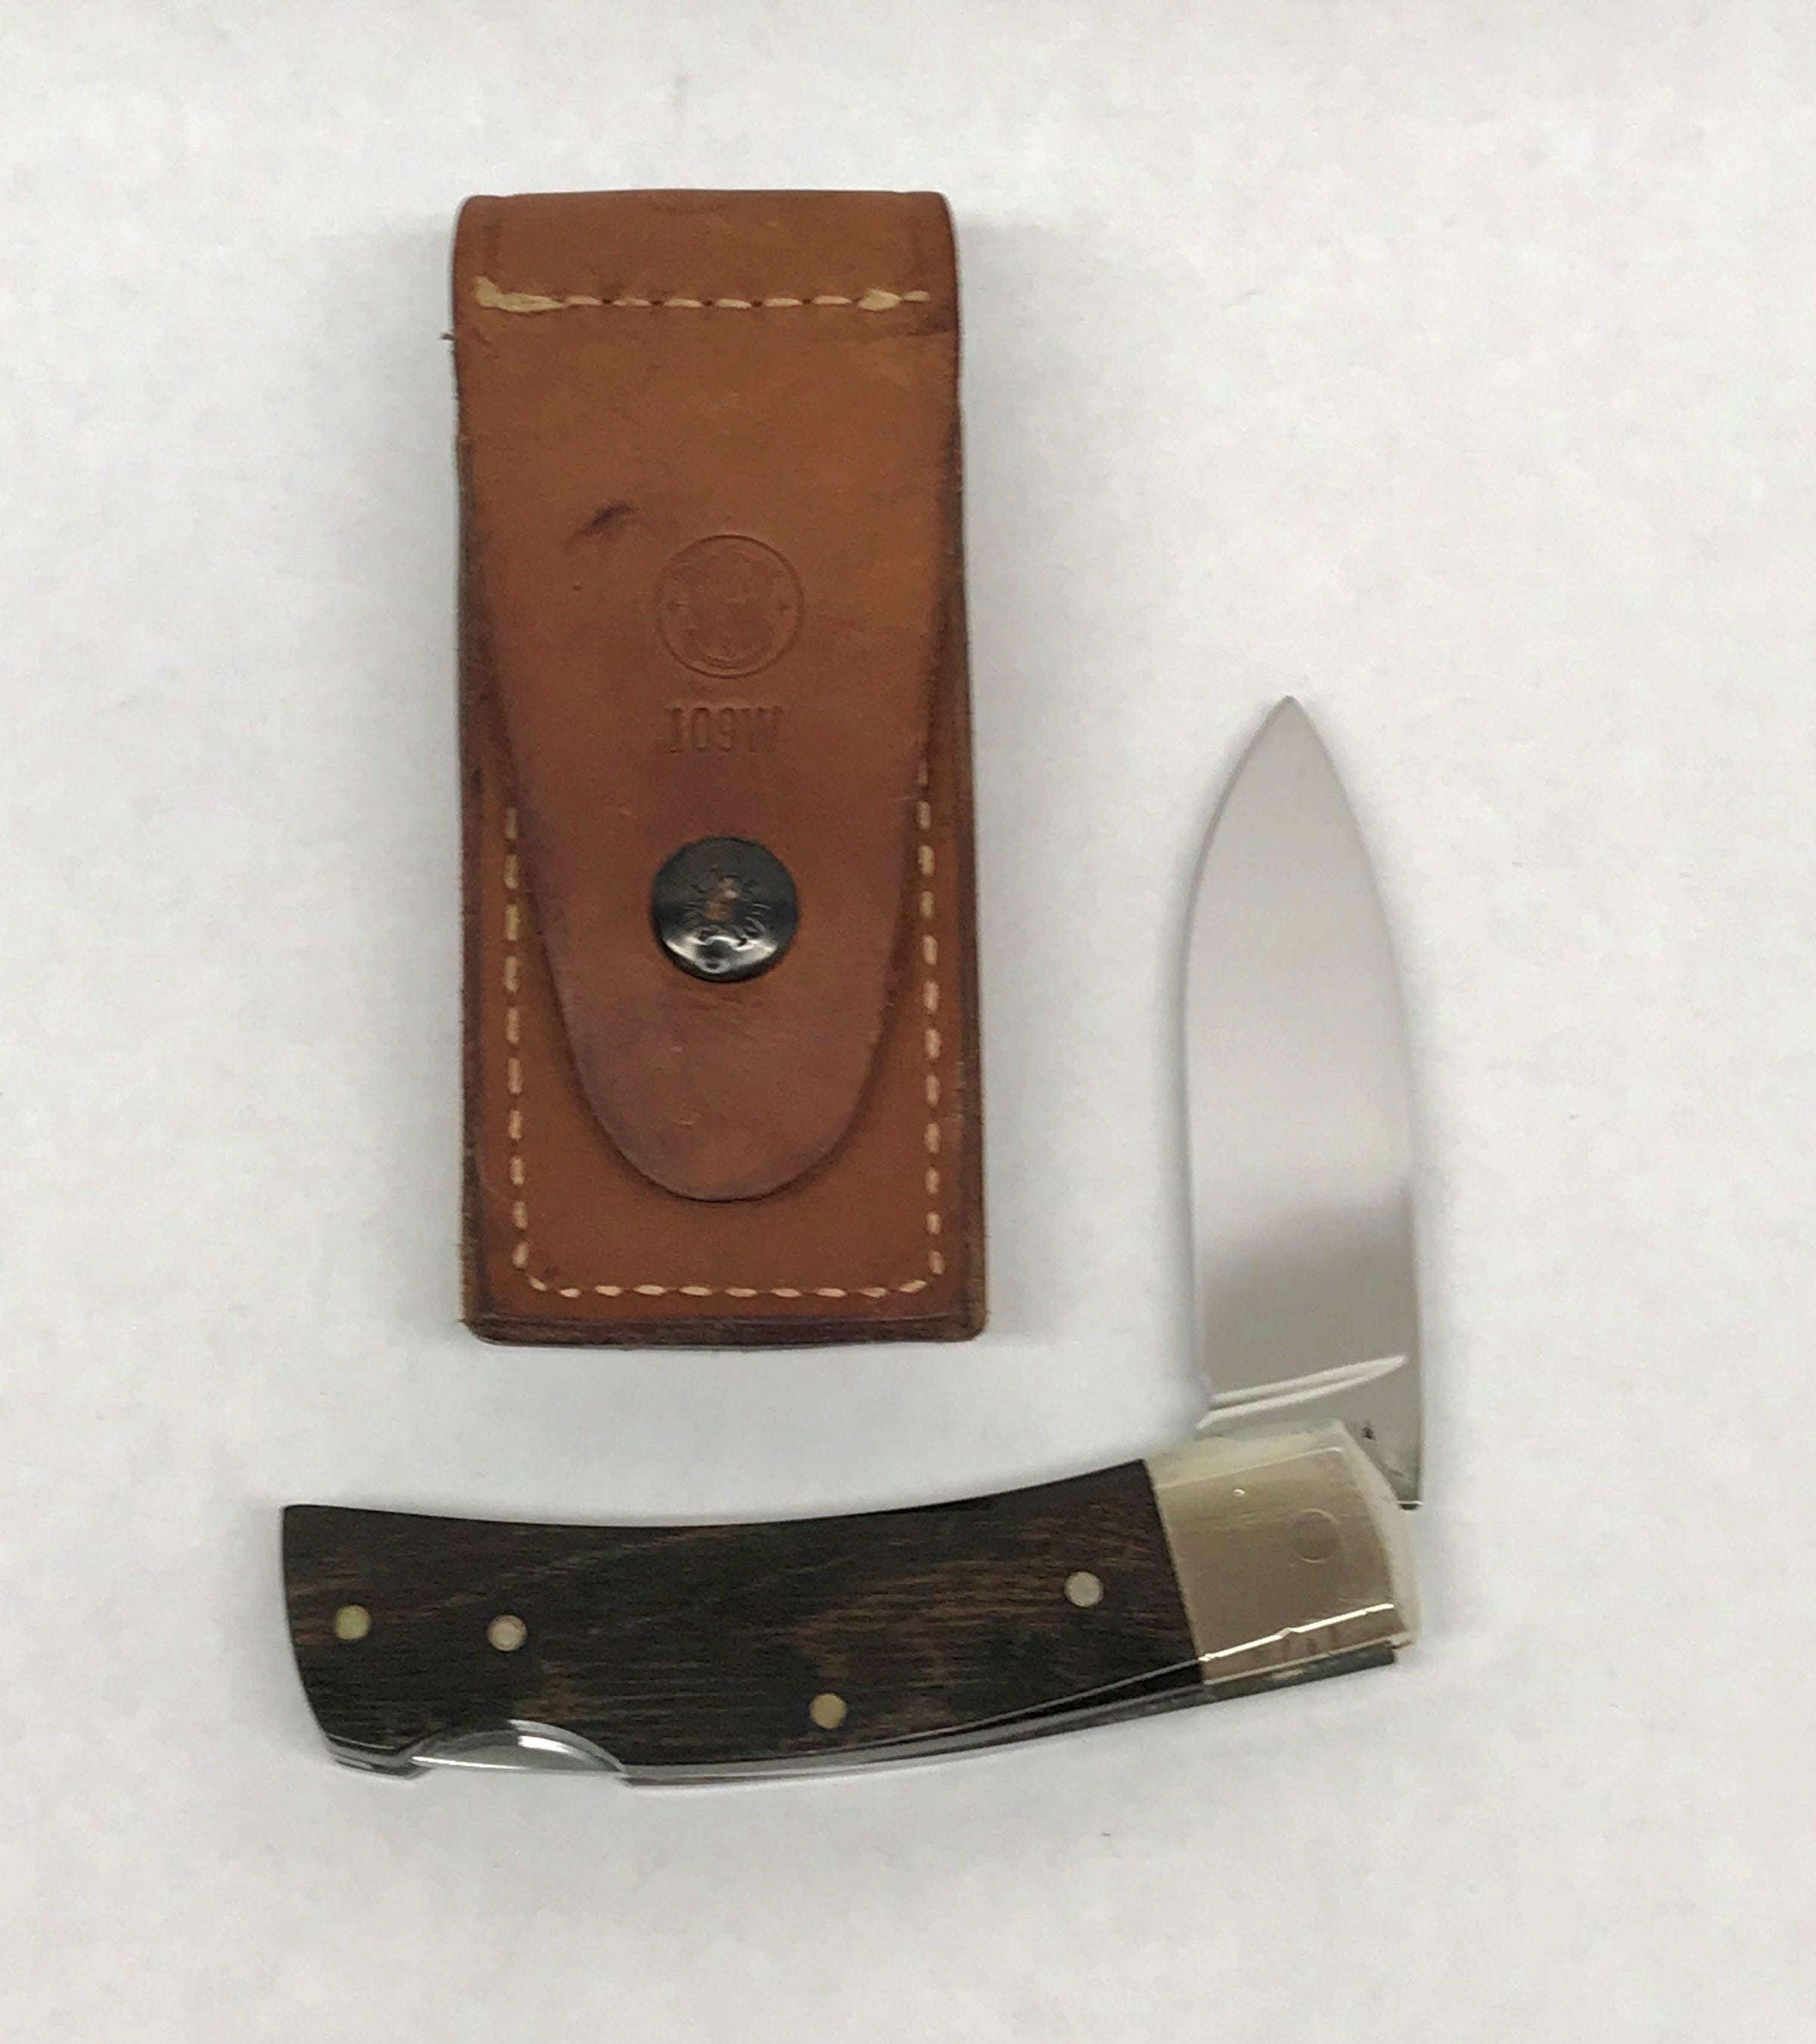 Rare Smith & Wesson 109W Folding Lockback Knife - Hers and His Treasures